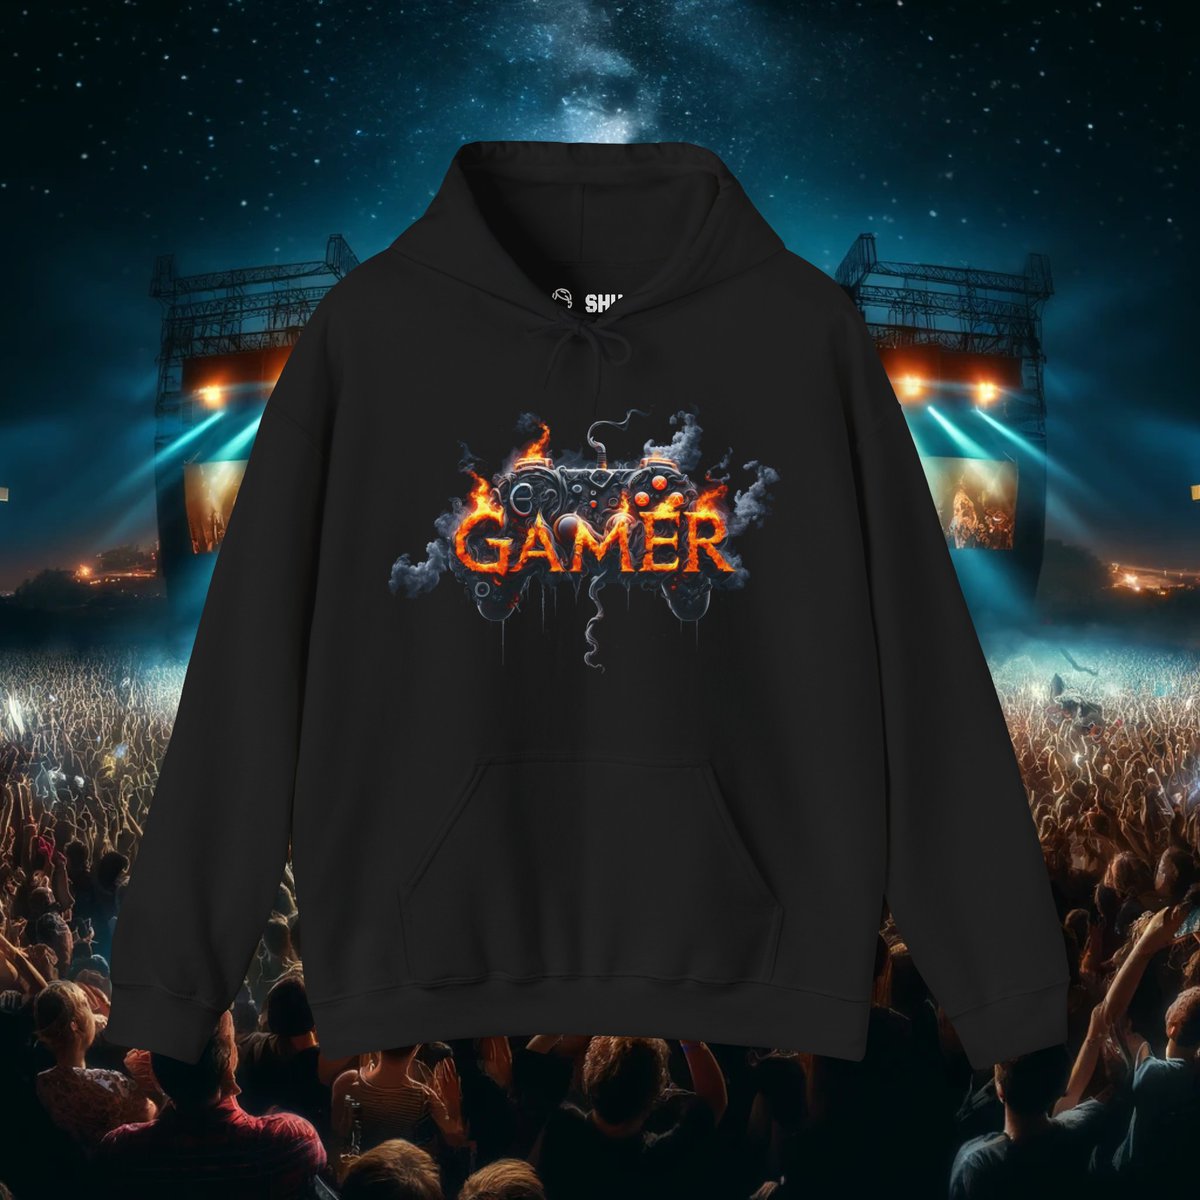 Level up! 🎮 Our Gamer Hoodie features a PC crushing a console w/explosion on the back & a molten controller on the front. It’s more than apparel—it’s a statement. 🔥 #GamingFashion #CoolHoodies
shhcreations.com/products/ultim…